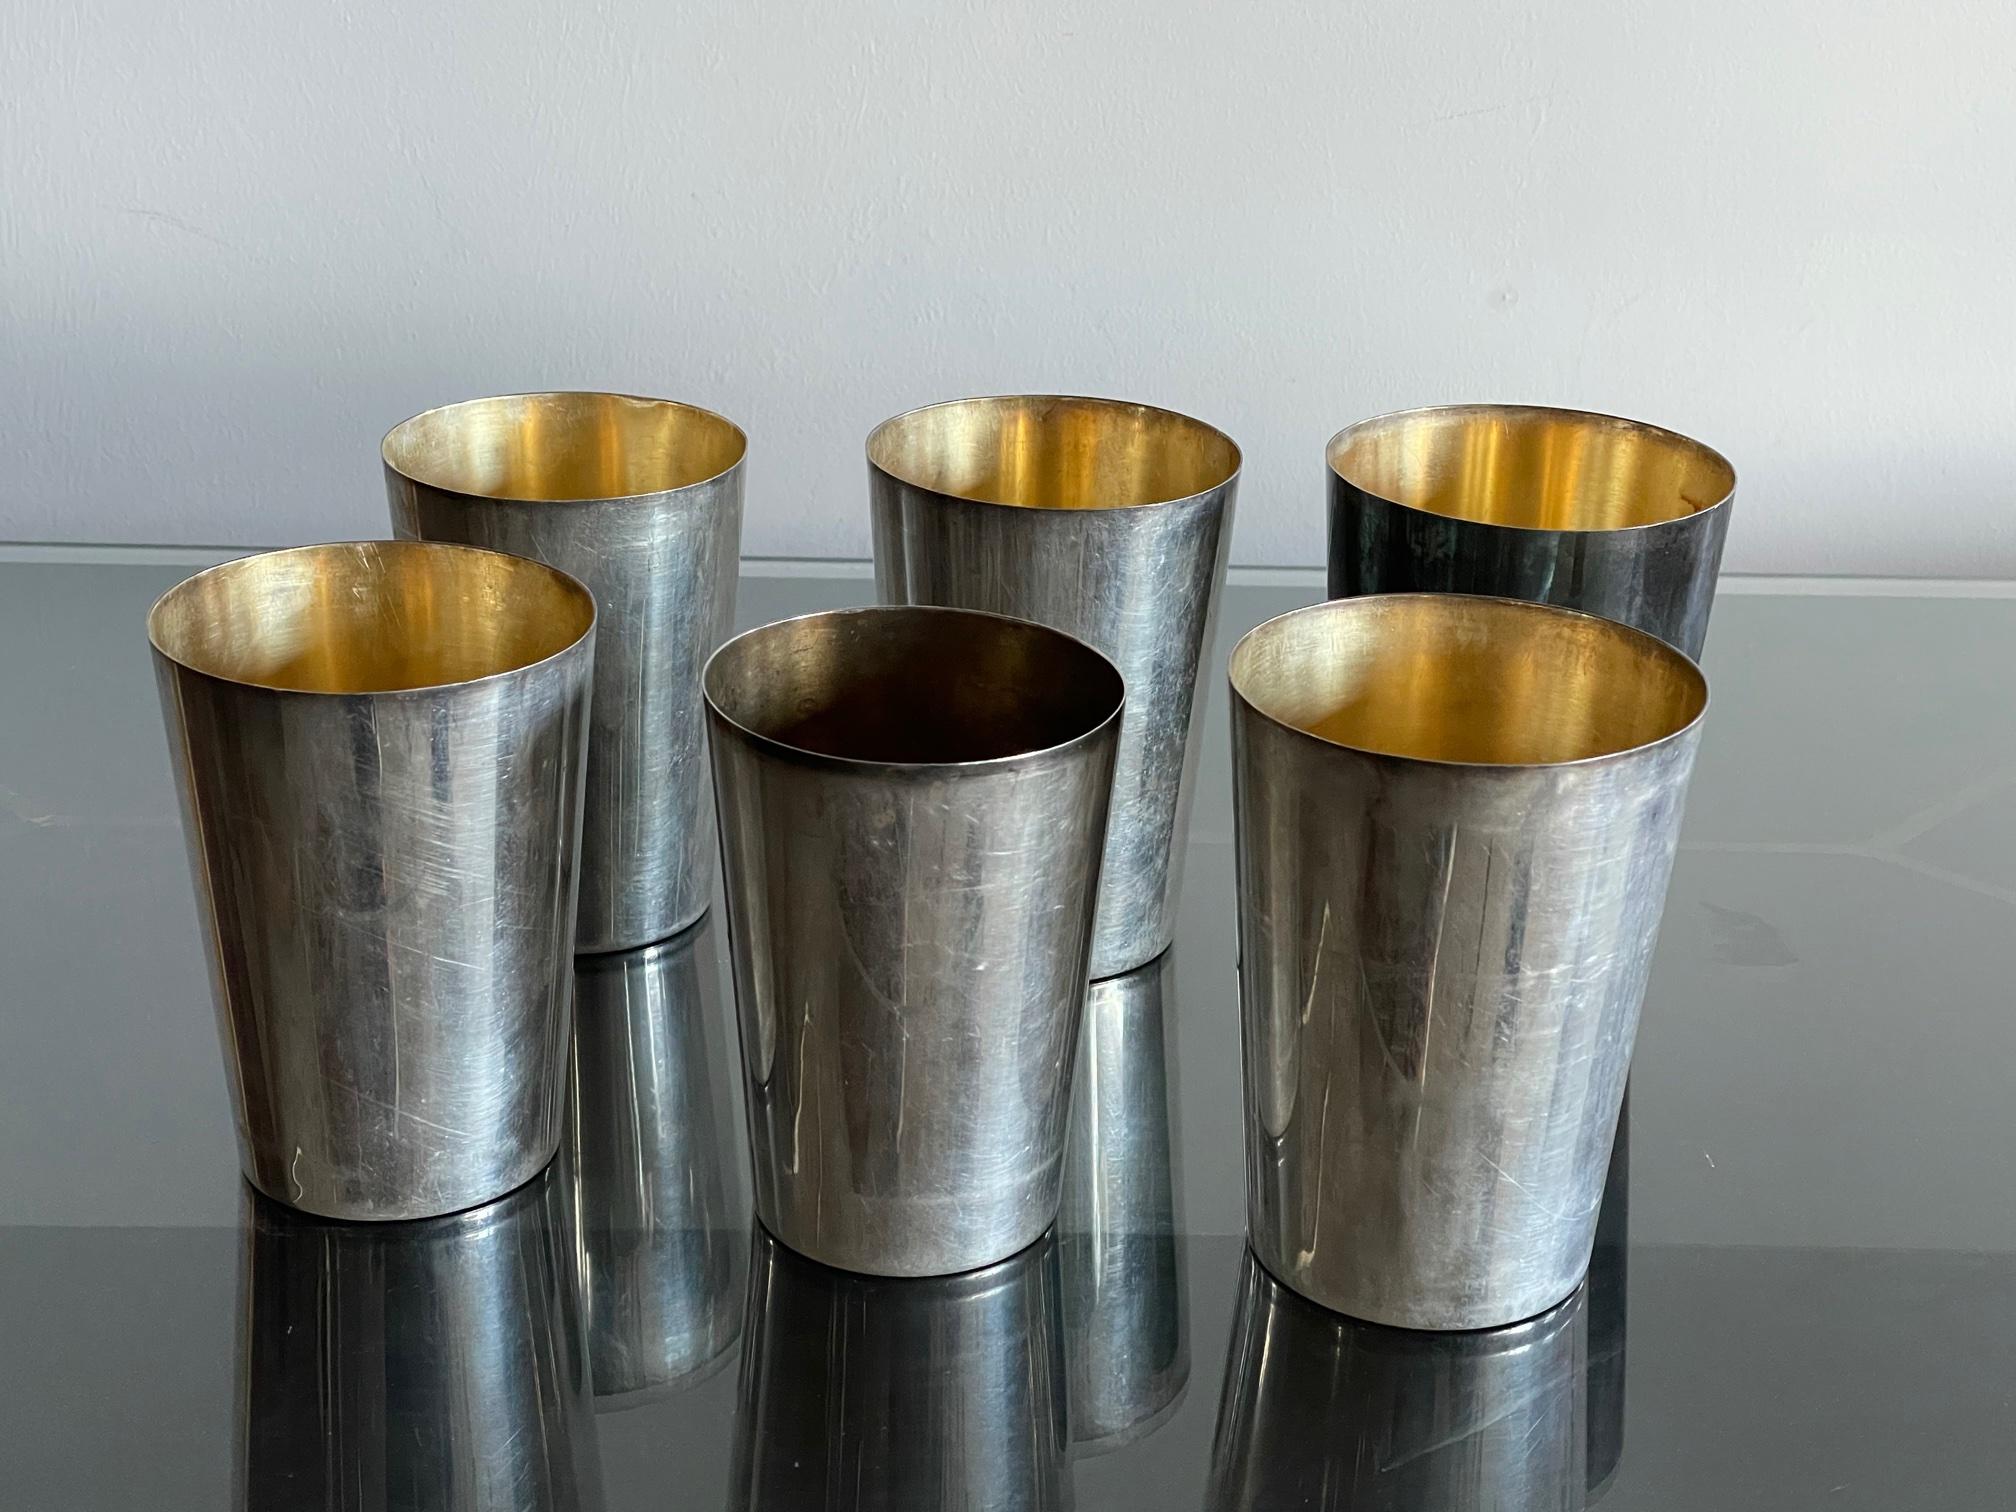 An elegant set of six tumblers retailed by Davis, 200 Picadilly, London. Silverplated brass, all fit in one with original leather holder. Each one marked on bottom with proper hallmarks, made in England.